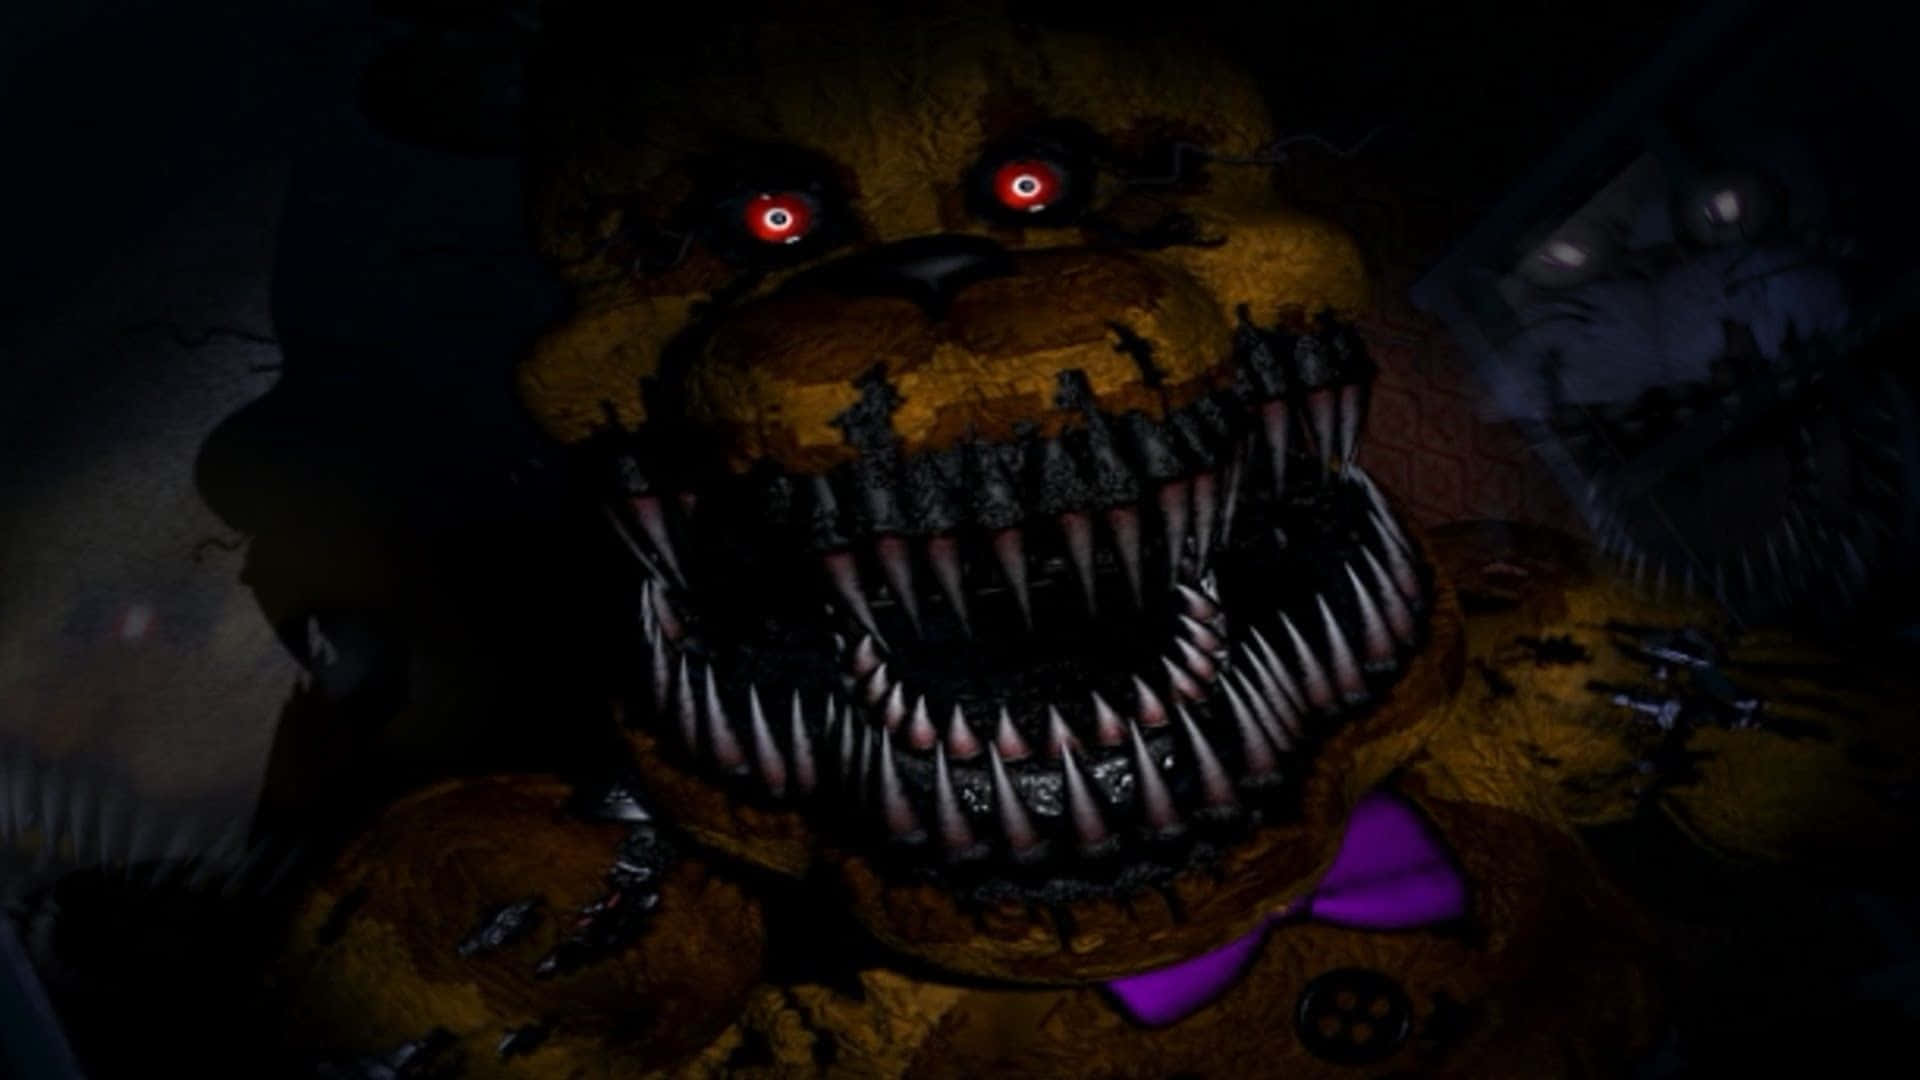 Enjoy All Five Nights At Freddys From Your Desktop Wallpaper